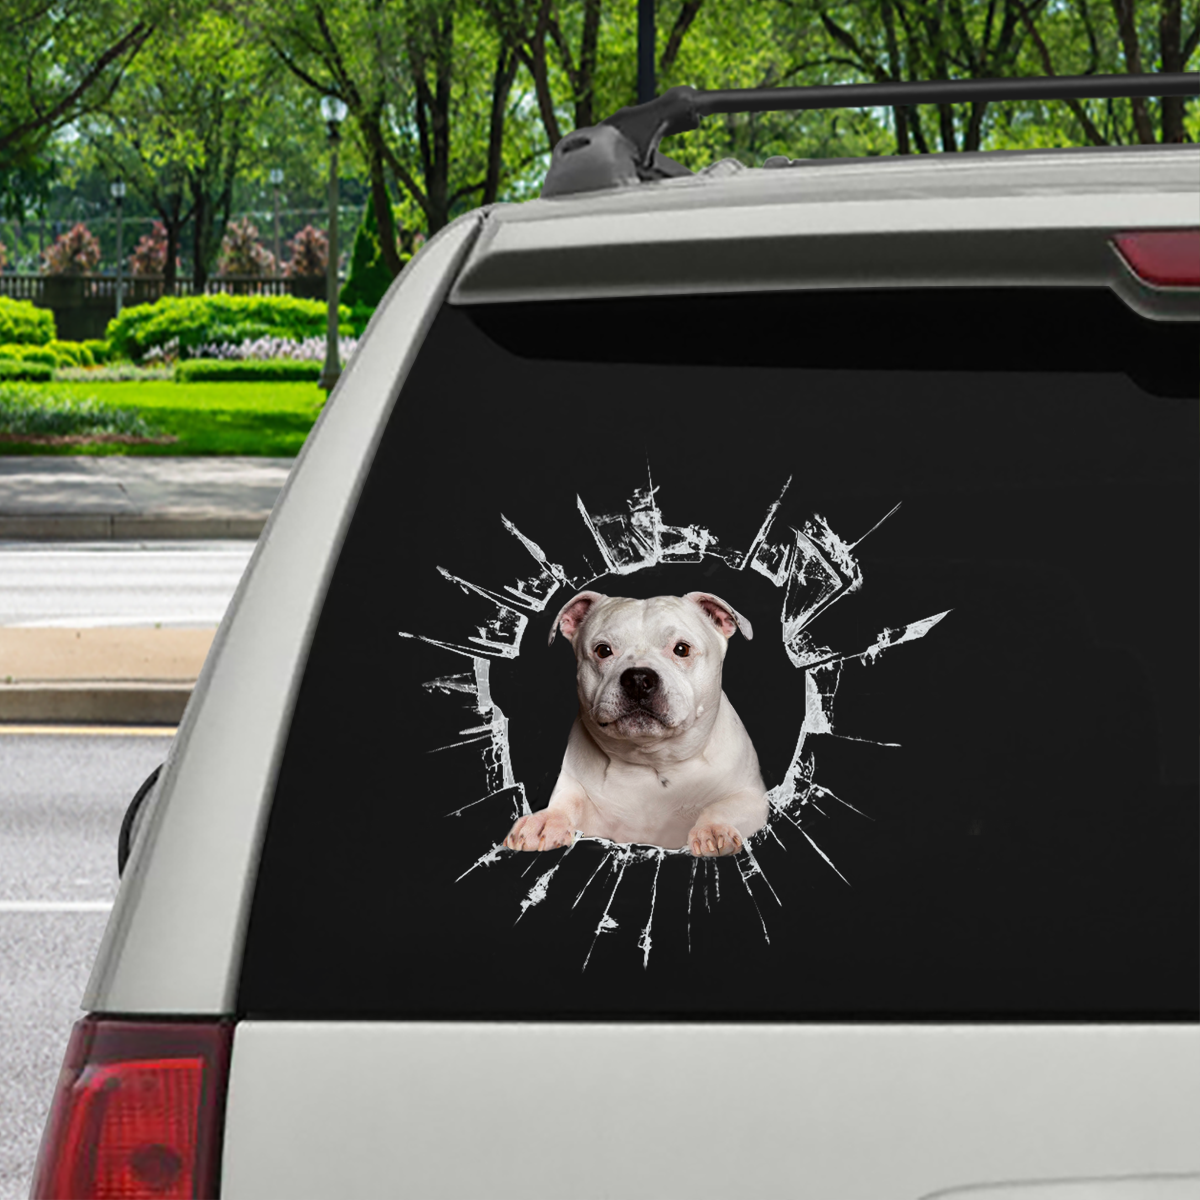 Get In - It's Time For Shopping - Staffordshire Bull Terrier Car Sticker V2